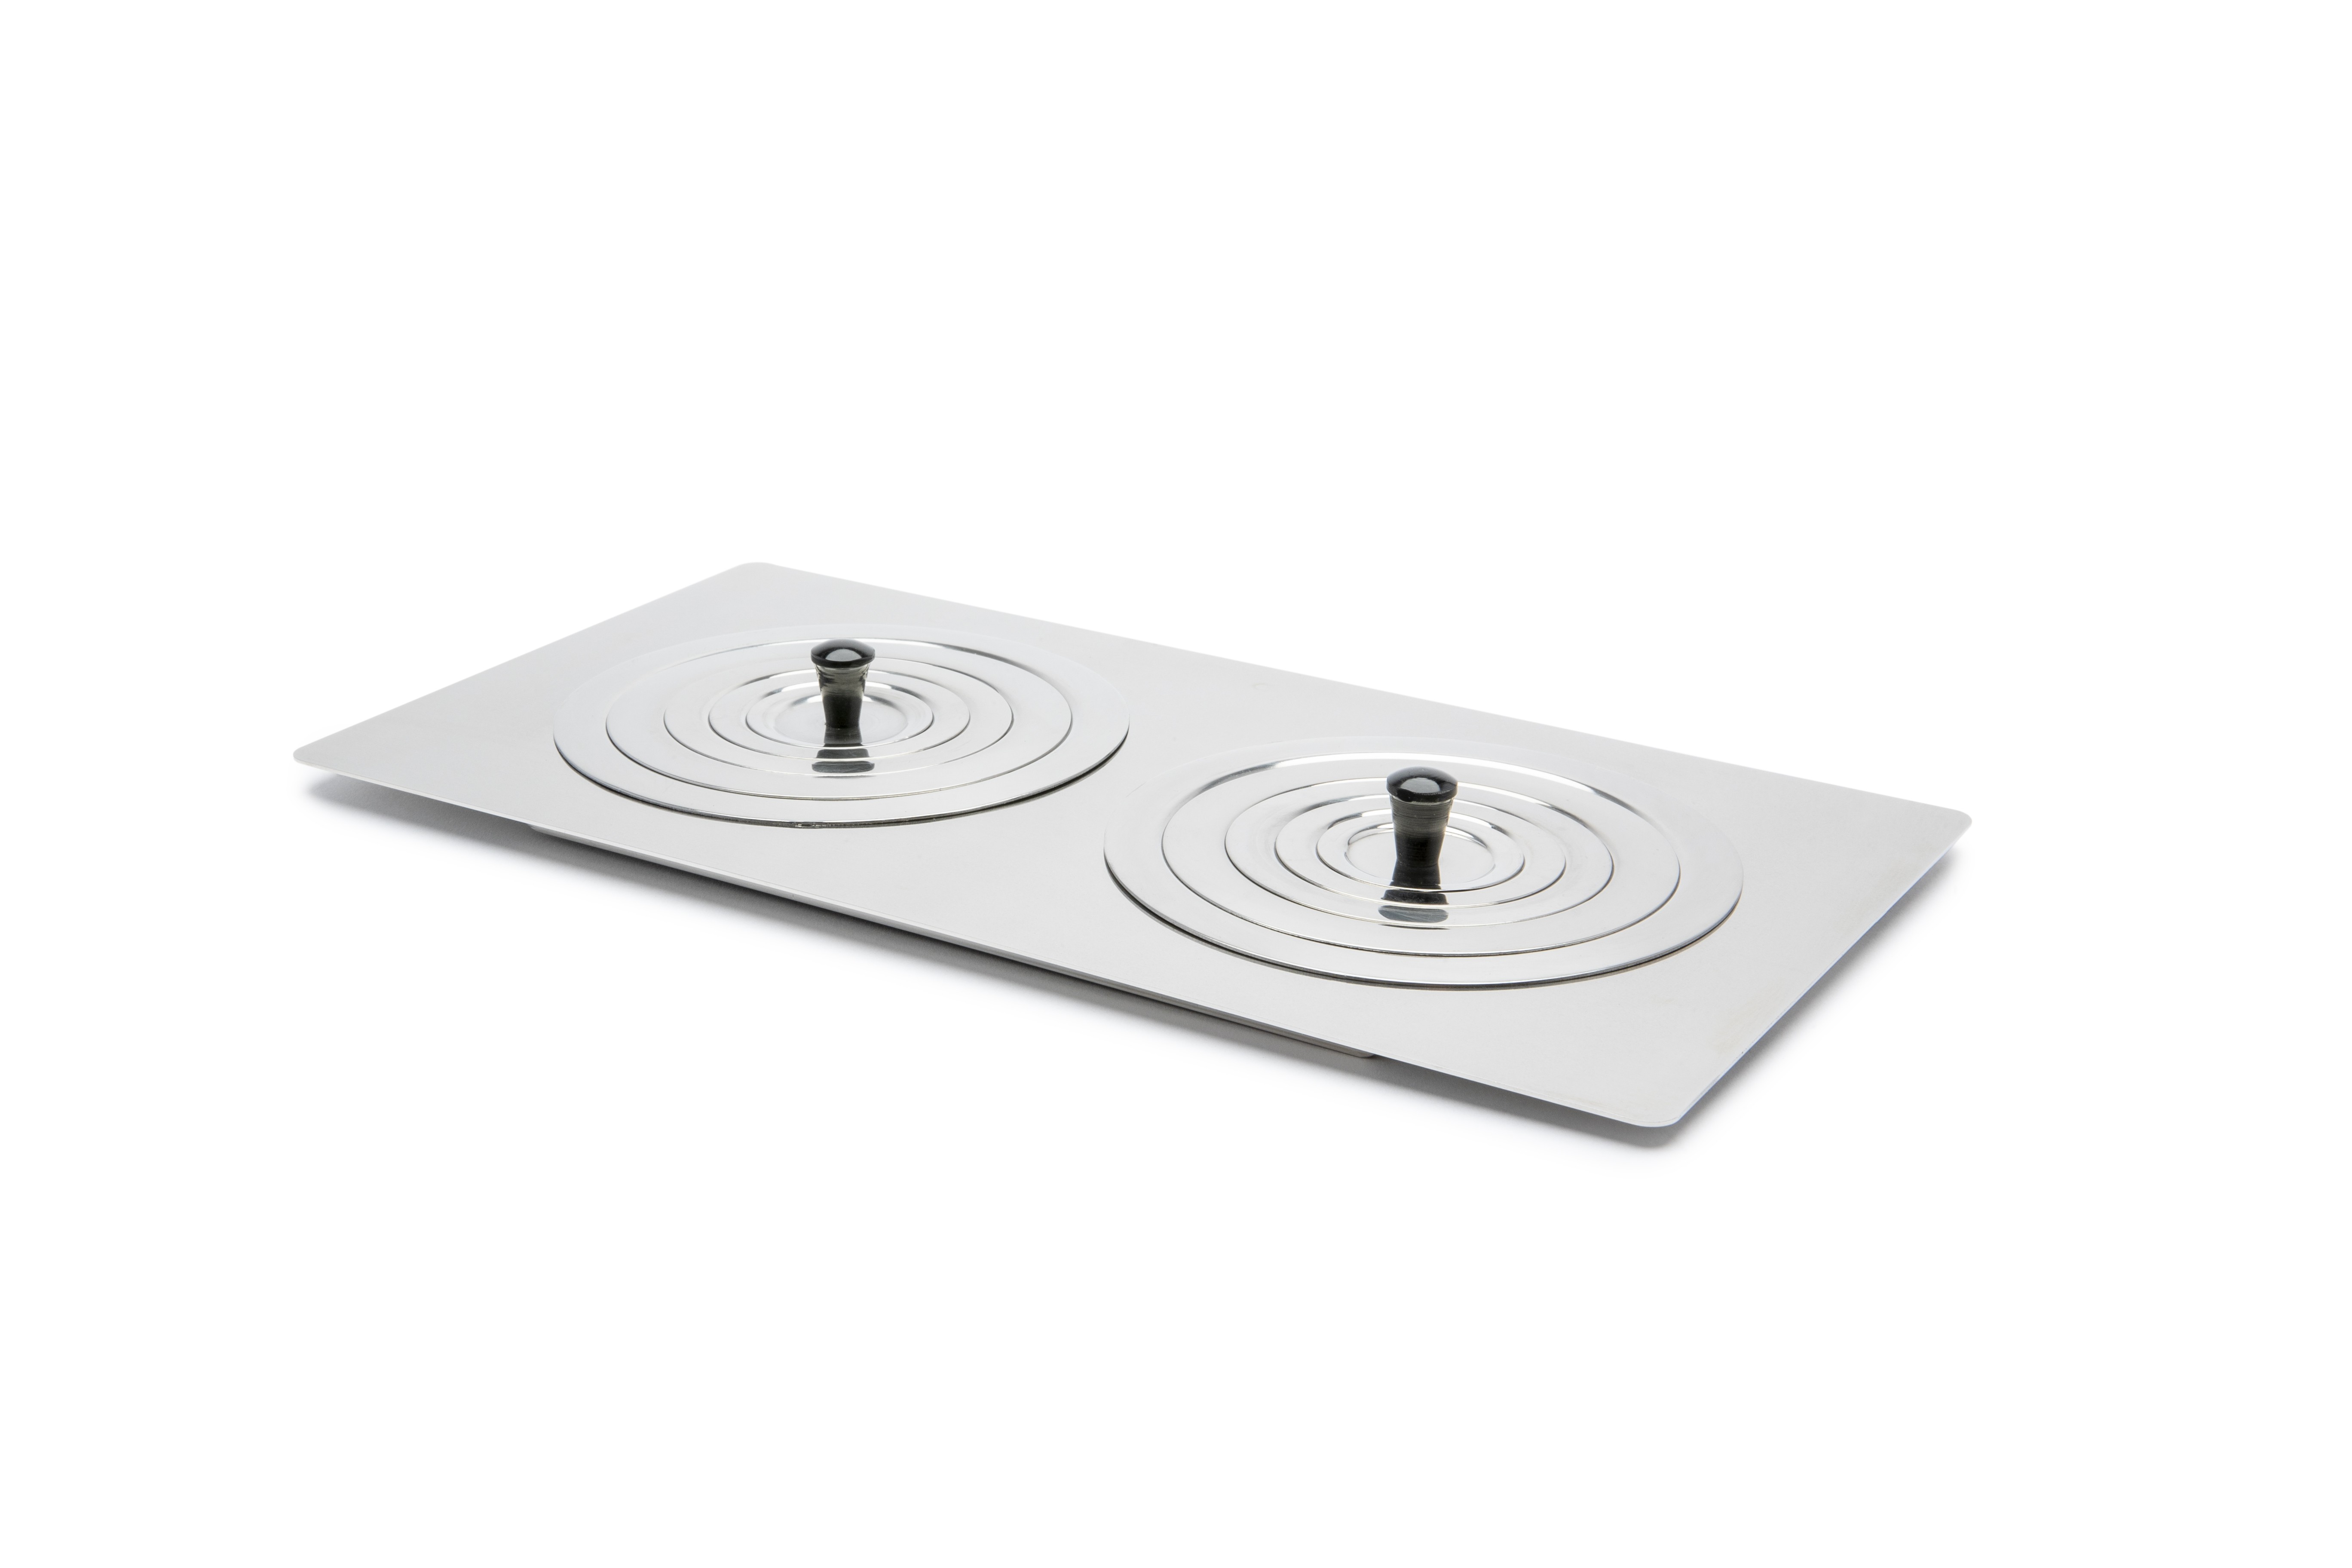 LF6 - Grant Instruments Stainless Steel Flat Lid With Ring Sets For Unstirred Water Baths